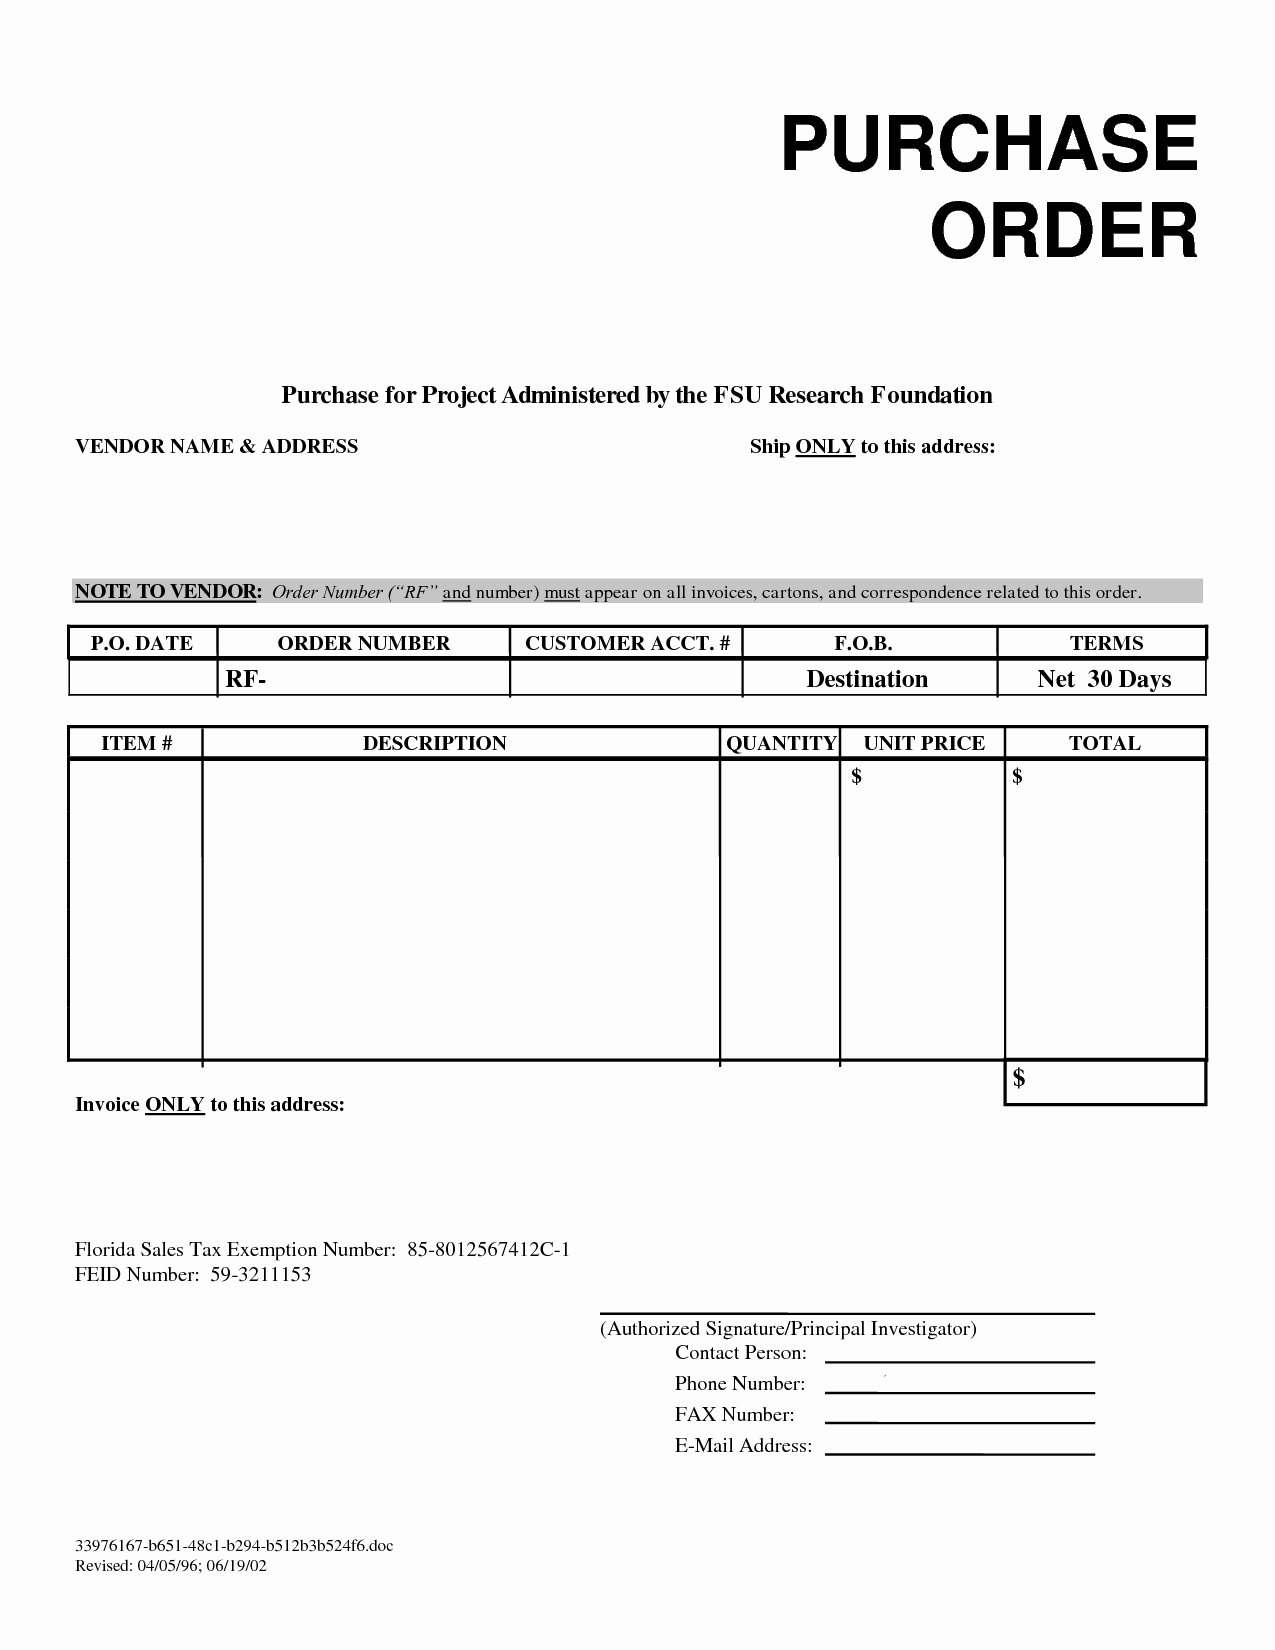 Sample order forms Template Inspirational Business Purchase order form and Samples to Inspire You